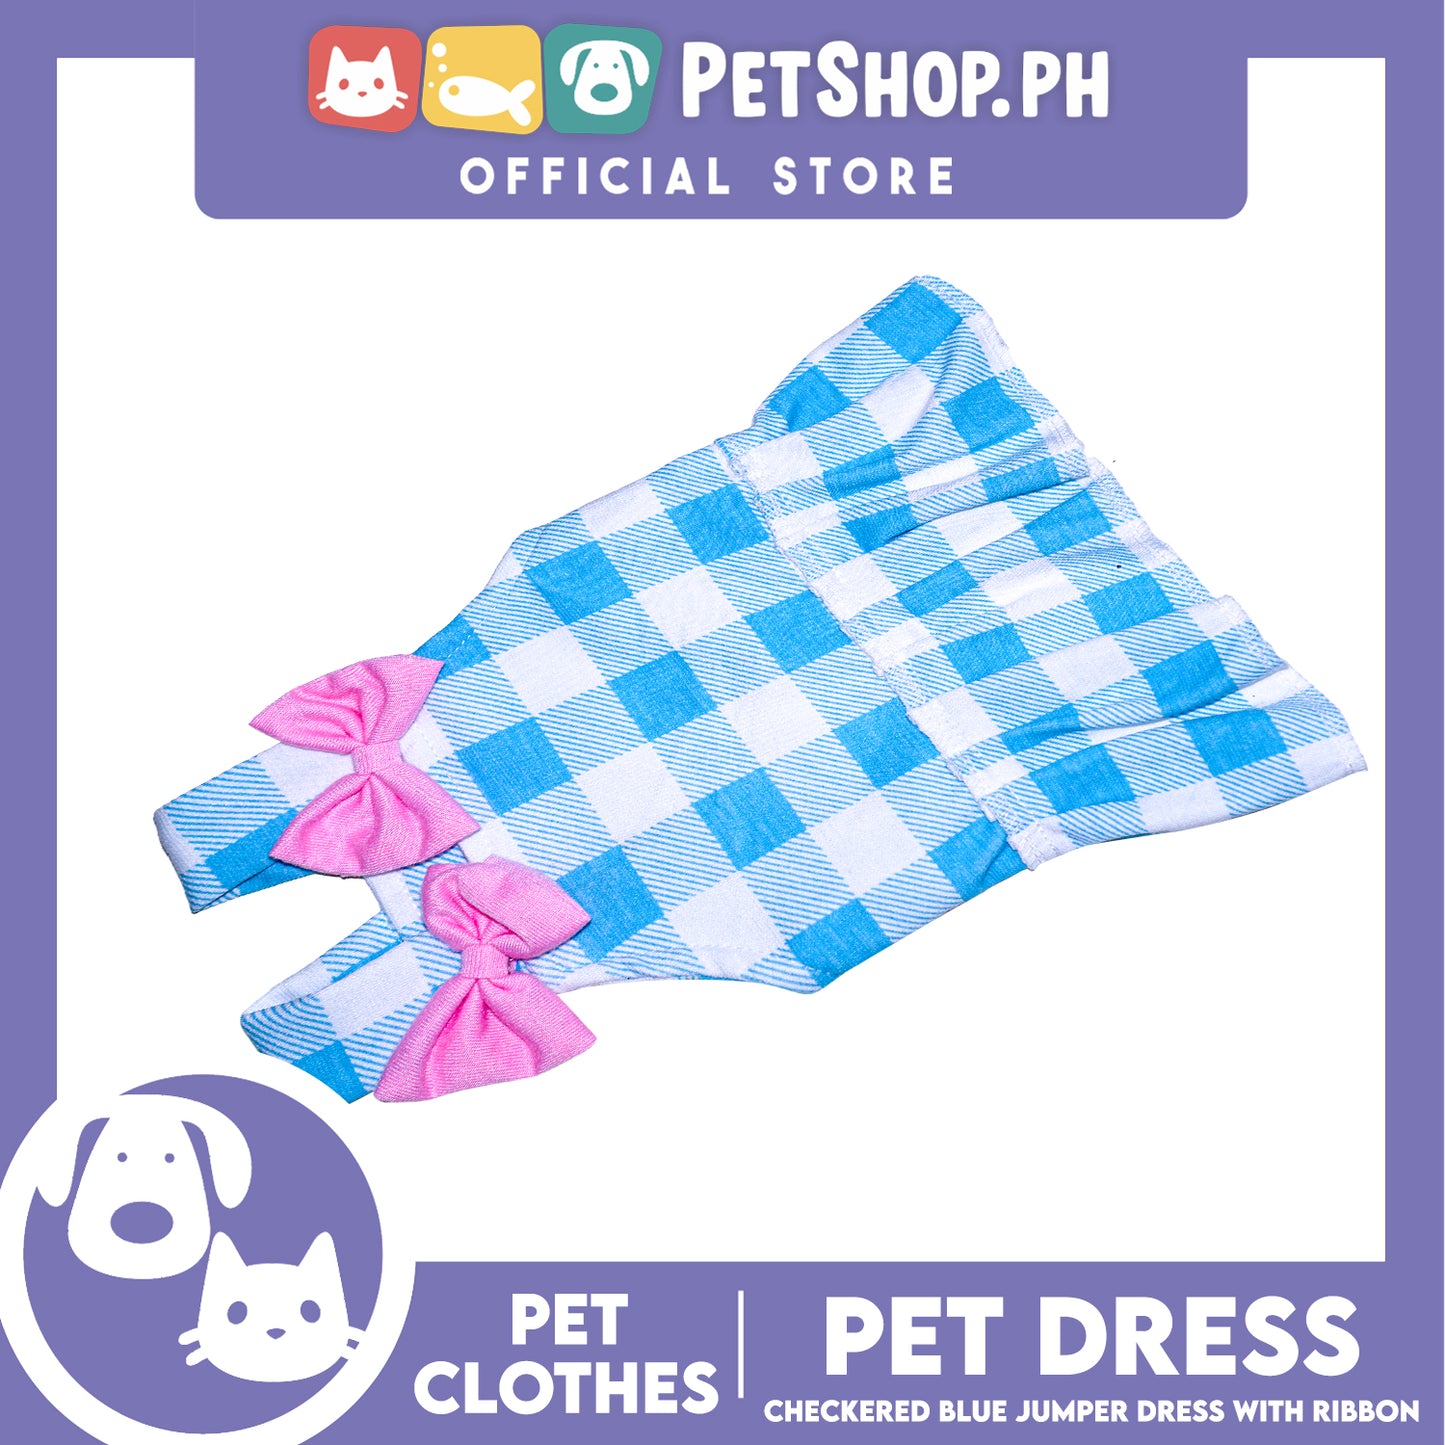 Pet Dress Checkered Blue Dress with pink ribbon (Medium) Perfect Fit for Dogs and Cats